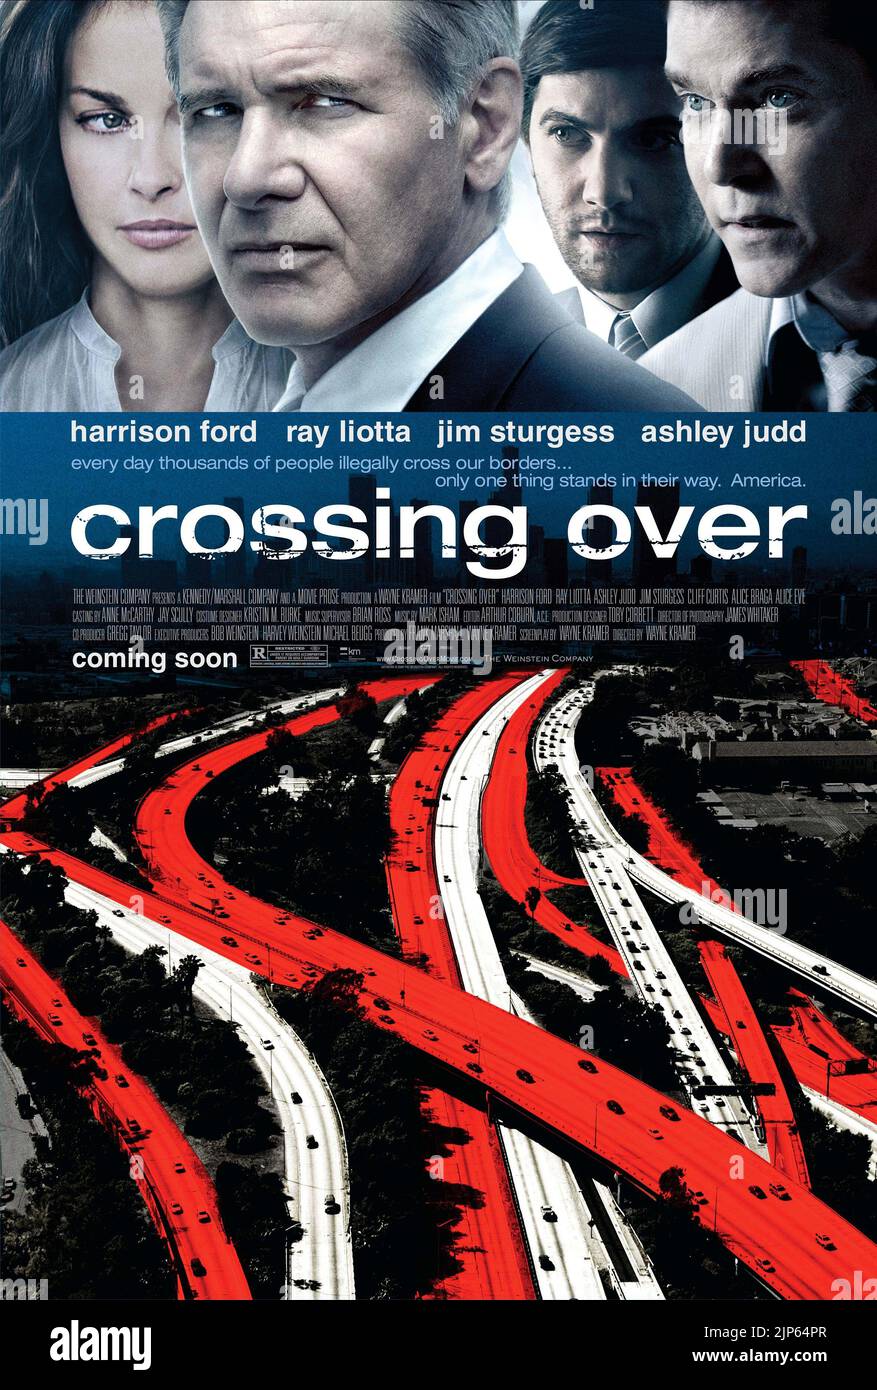 ASHLEY JUDD, HARRISON FORD, JIM STURGESS, RAY LIOTTA POSTER, CROSSING OVER, 2009 Stock Photo